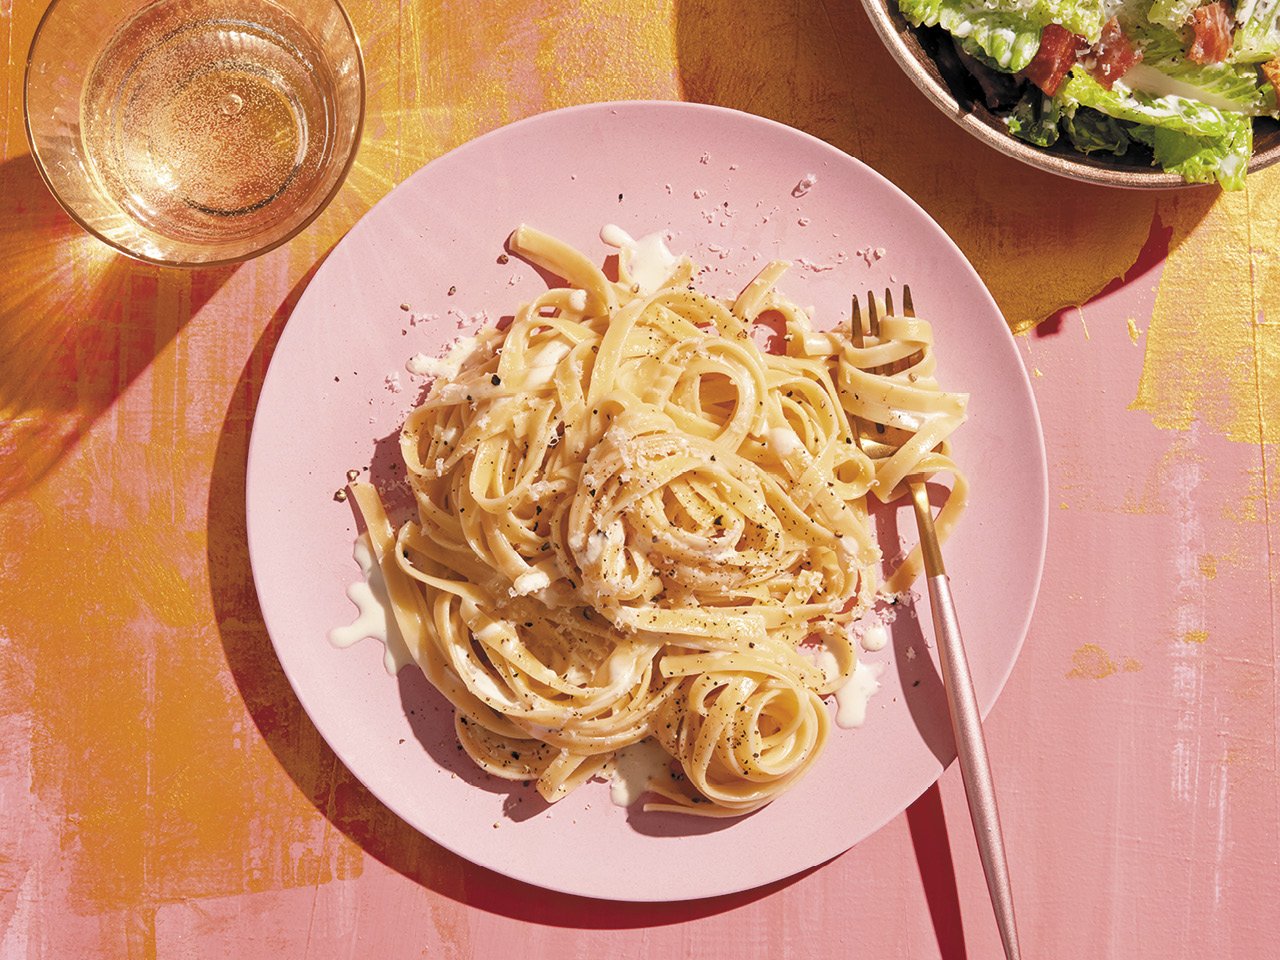 Prosecco fettuccine alfredo served on a plate alongside sparkling wine and a salad